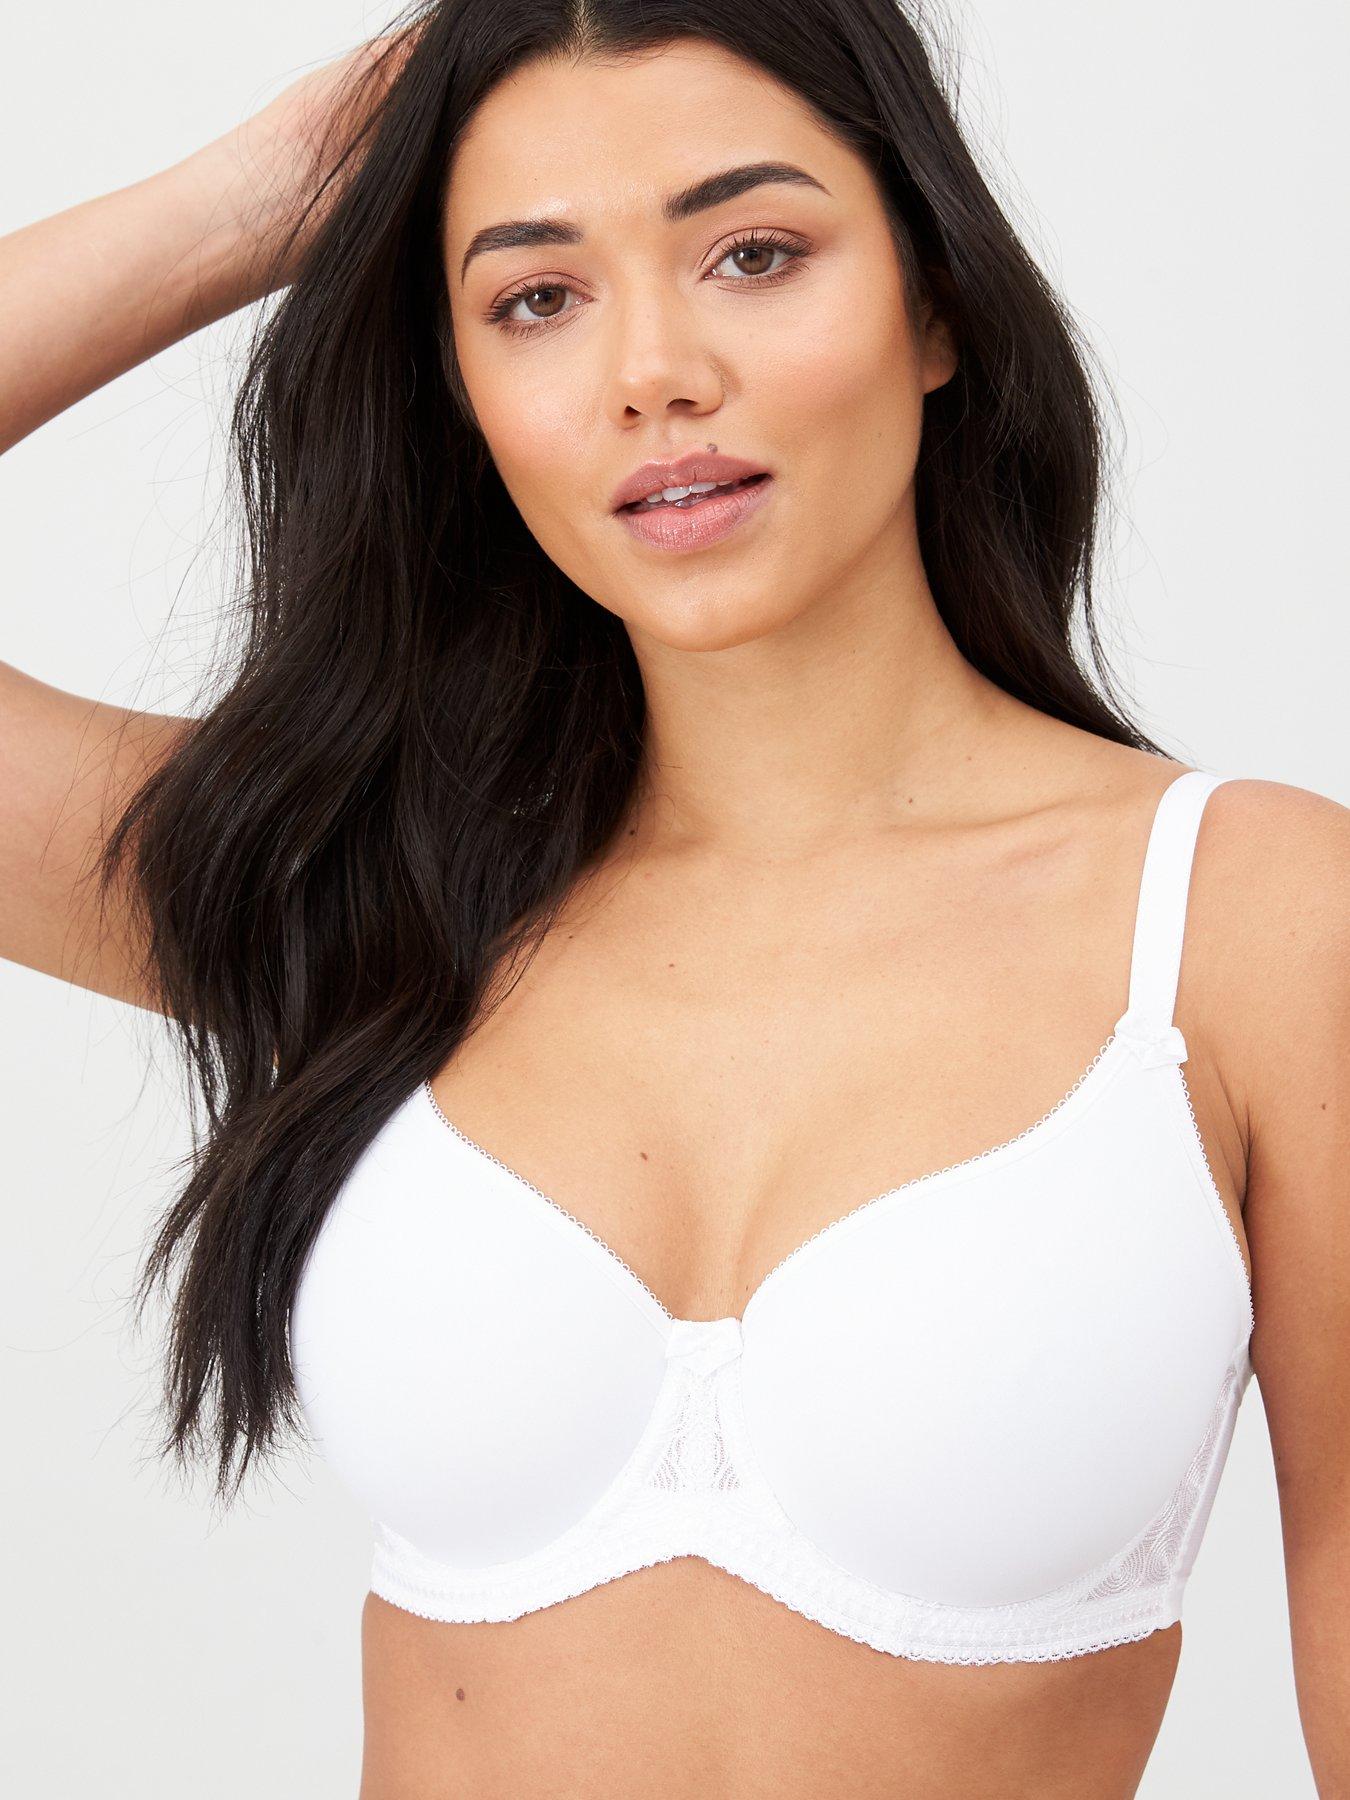 Panache Rocha Molded Spacer T-Shirt Bra in Stone Blue - Busted Bra